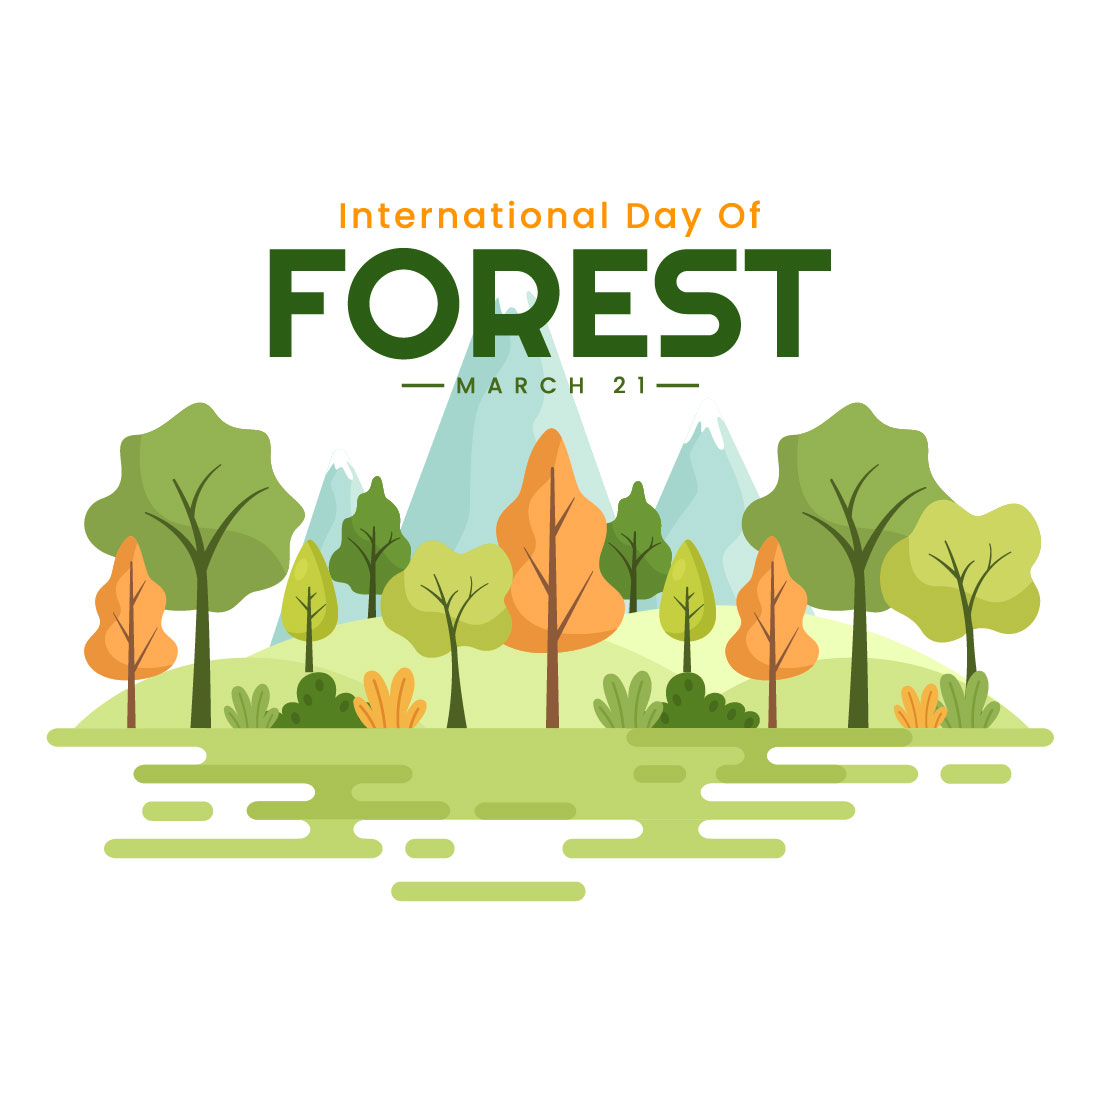 Forestry Day Graphics Design cover image.